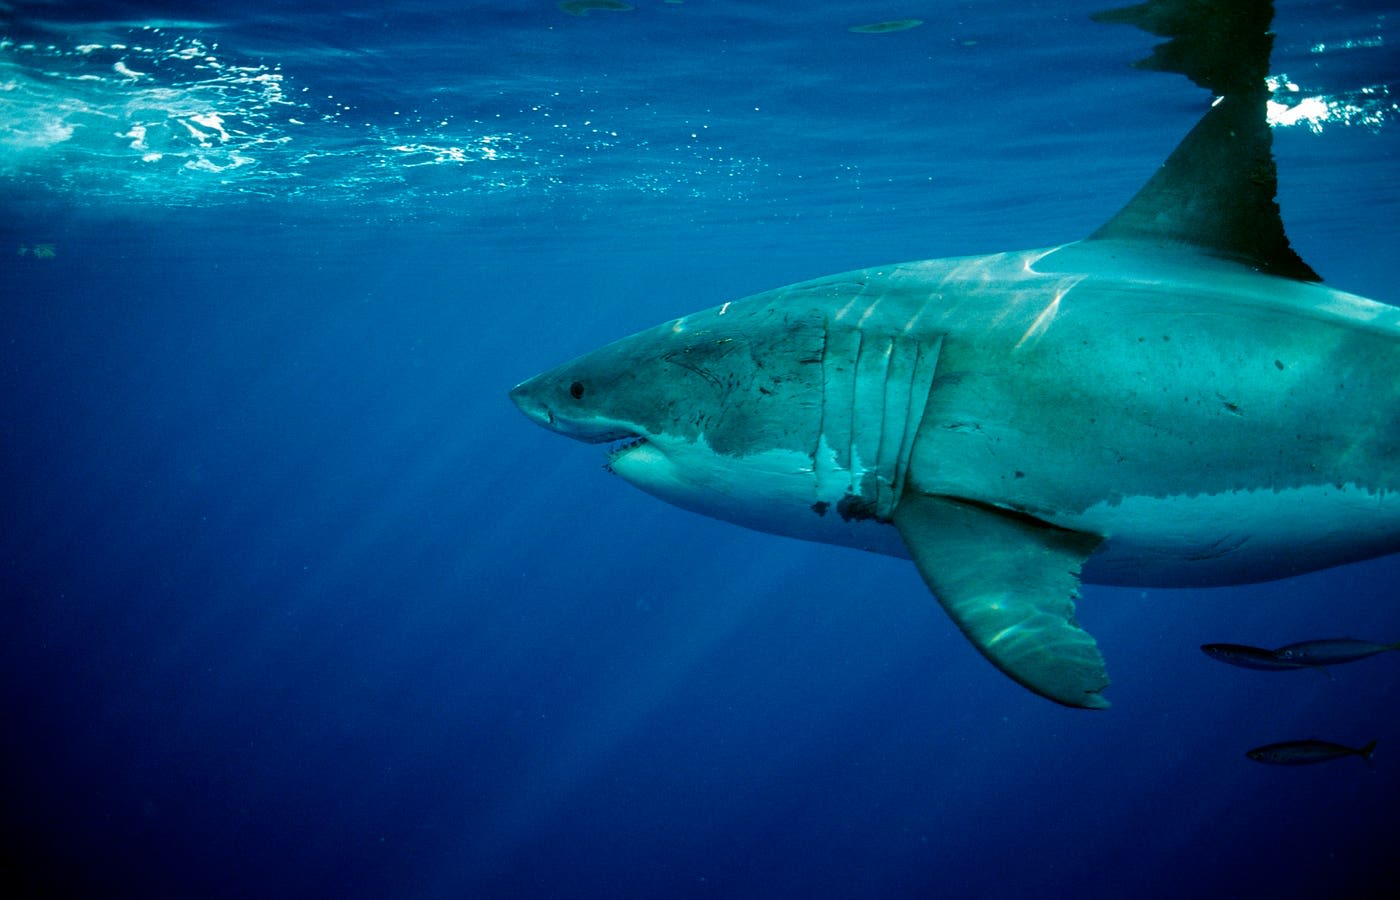 California Shark Warning System In Jeopardy Due To Budget Cuts